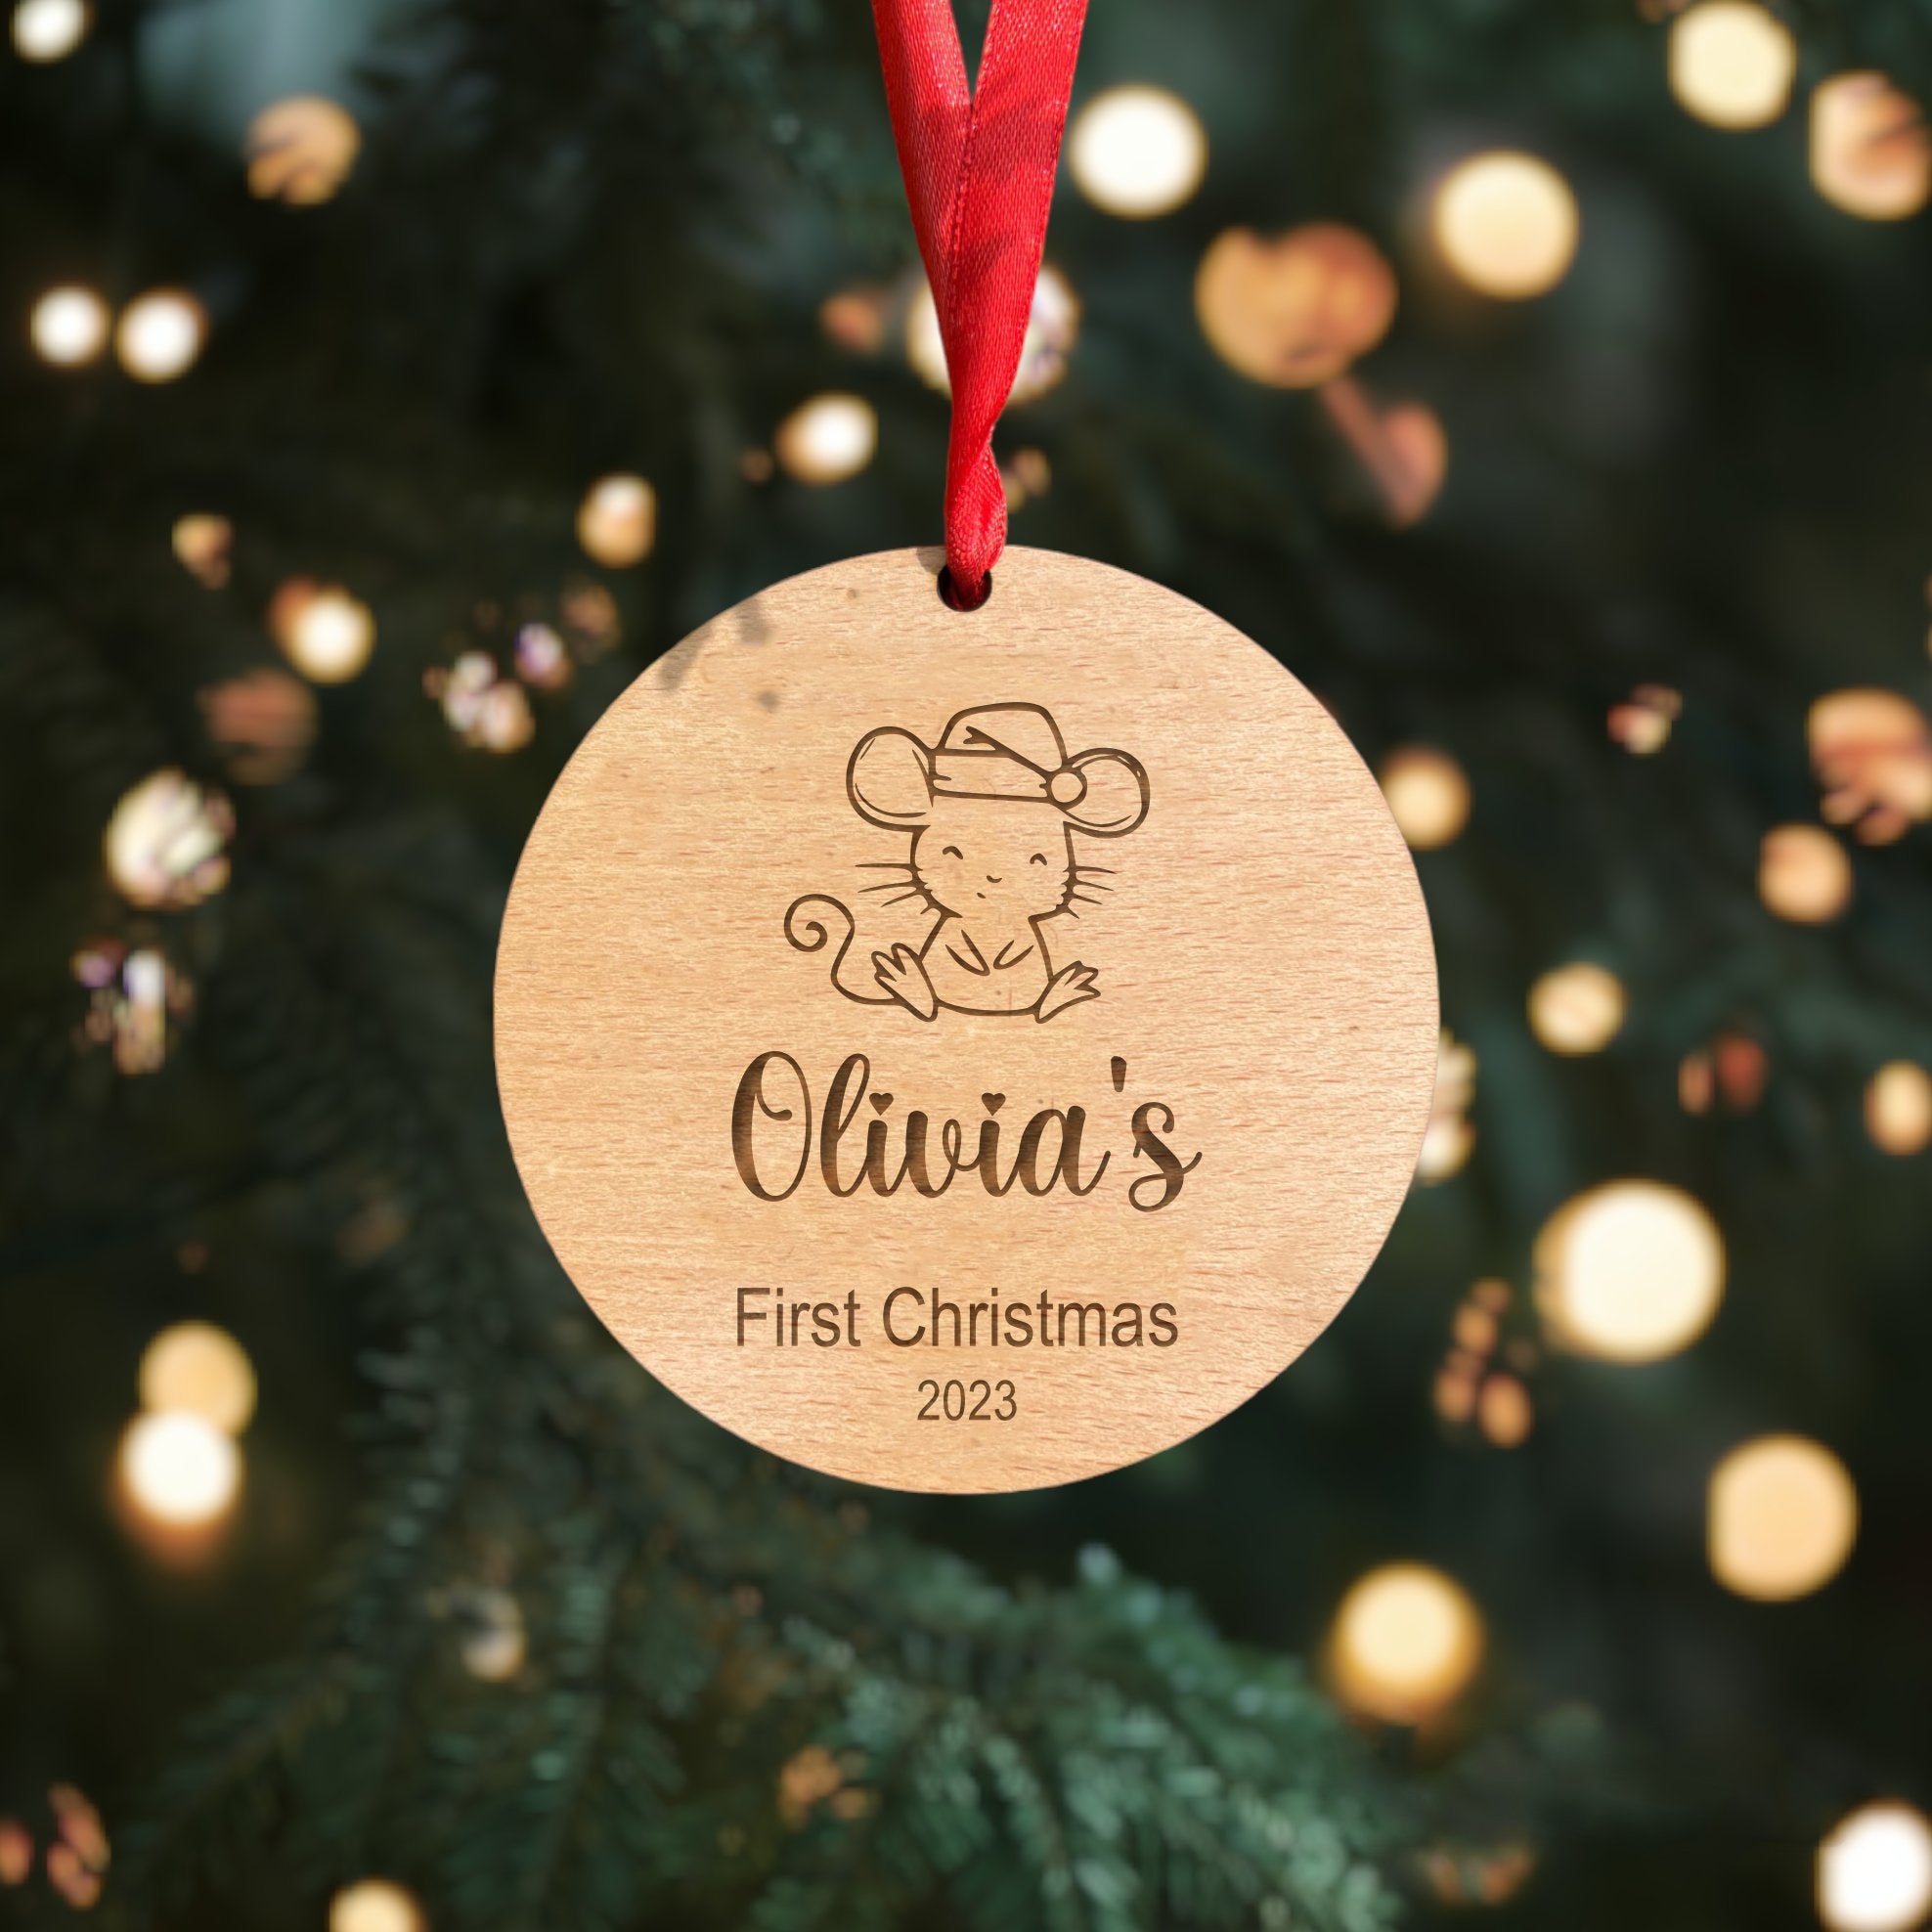 Charming Mouse Design Personalized Baby's First Christmas Bauble - Made with Genuine Beech Veneer Wood, Customized with Your Baby's Name and Current Year. Create Precious Memories with This Delightful Keepsake Ornament.